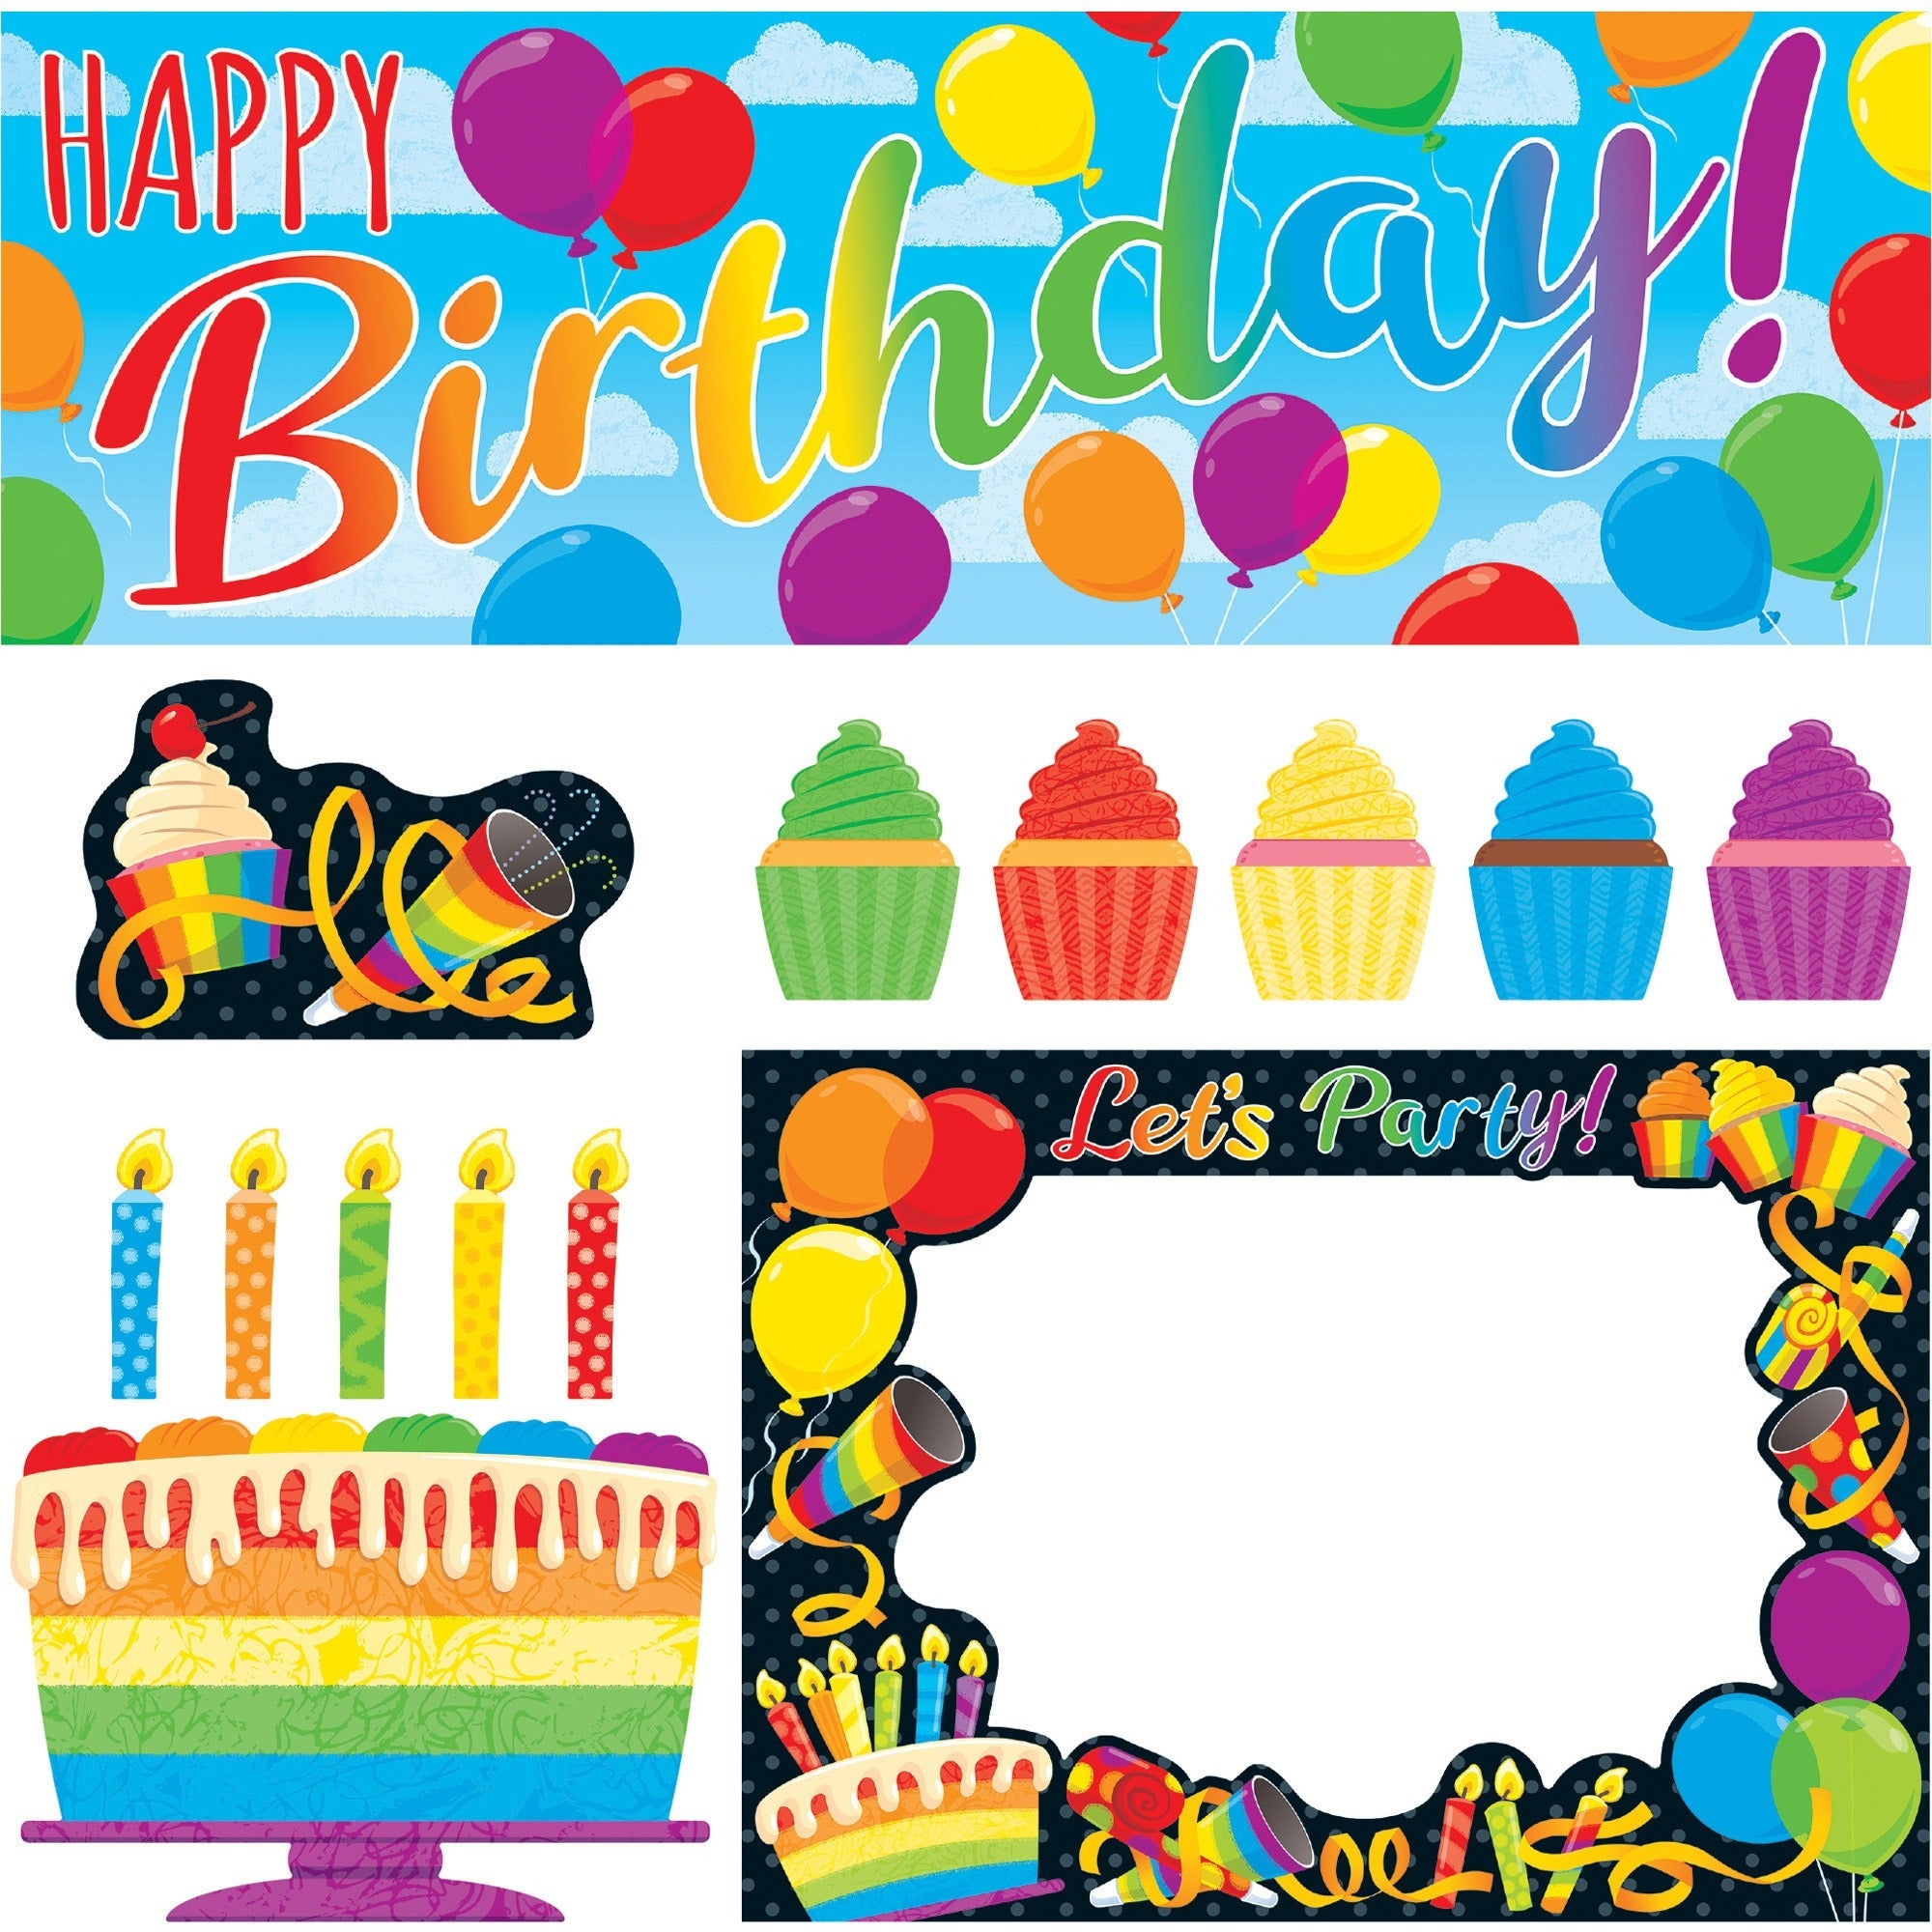 trend-rainbow-birthday-wipe-off-learning-set-dry-erase-surface-durable-reusable-1-each_tept19002 - 1